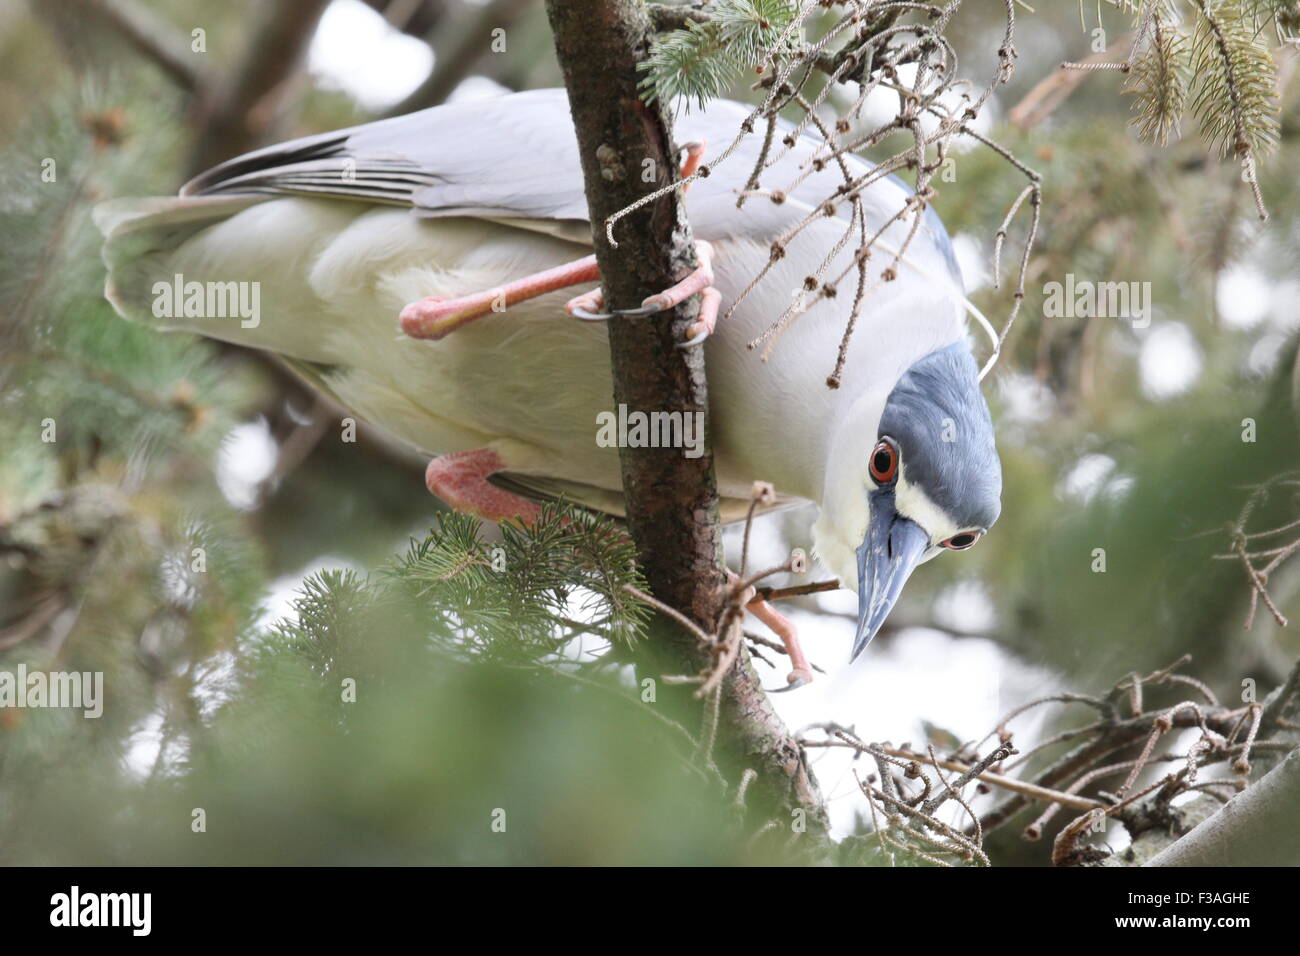 Heron in a tree looking down at the camera. Stock Photo